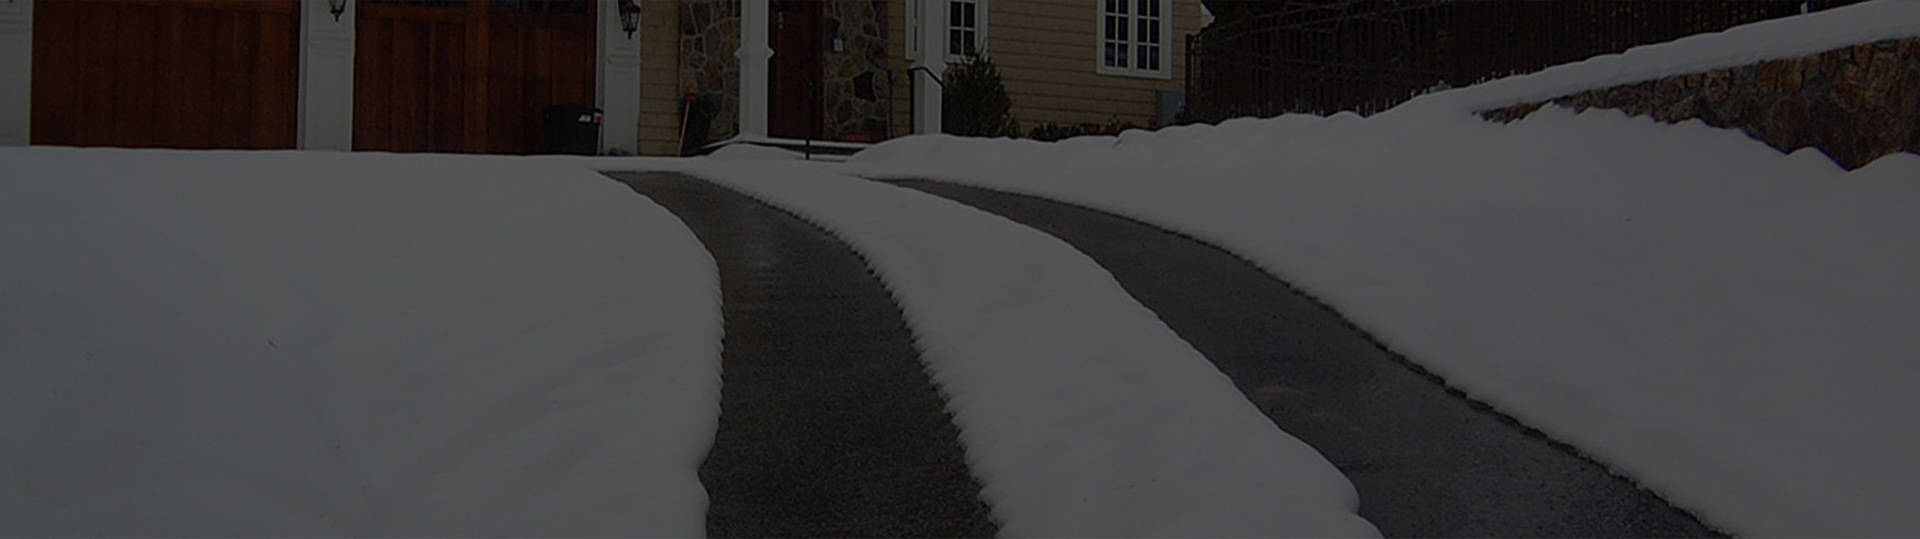 Fort Wayne area heated driveways and snow melting systems